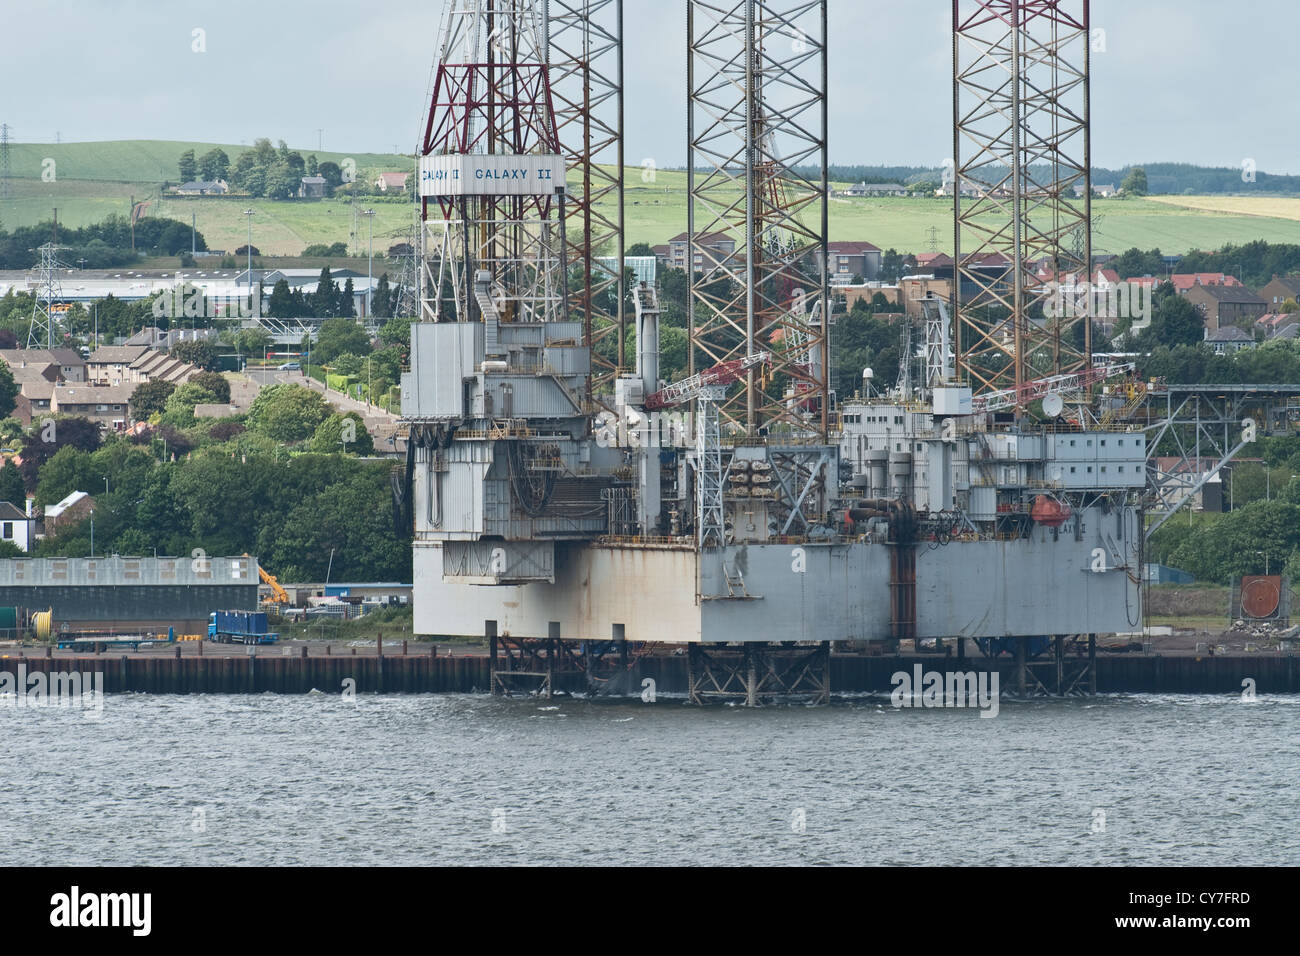 Oil industry drilling rig under going maintenance in Dundee docks, Scotland Stock Photo